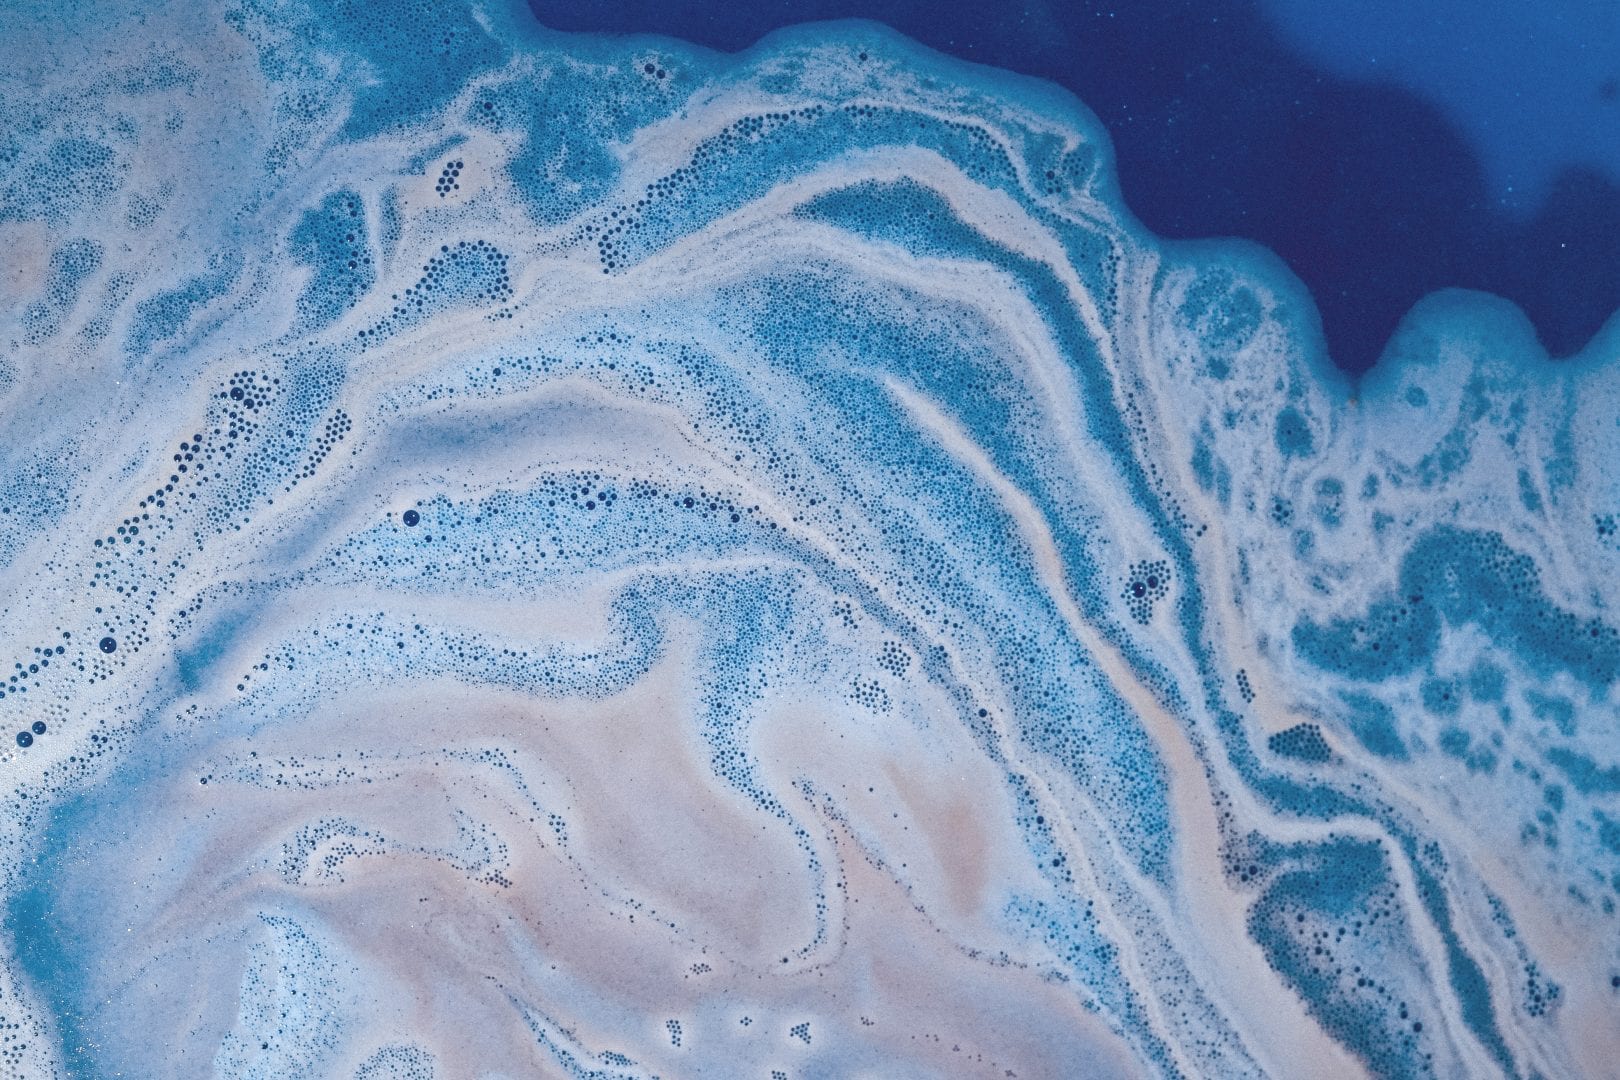 a swirl of a white liquid and a blue liquid like oil on water